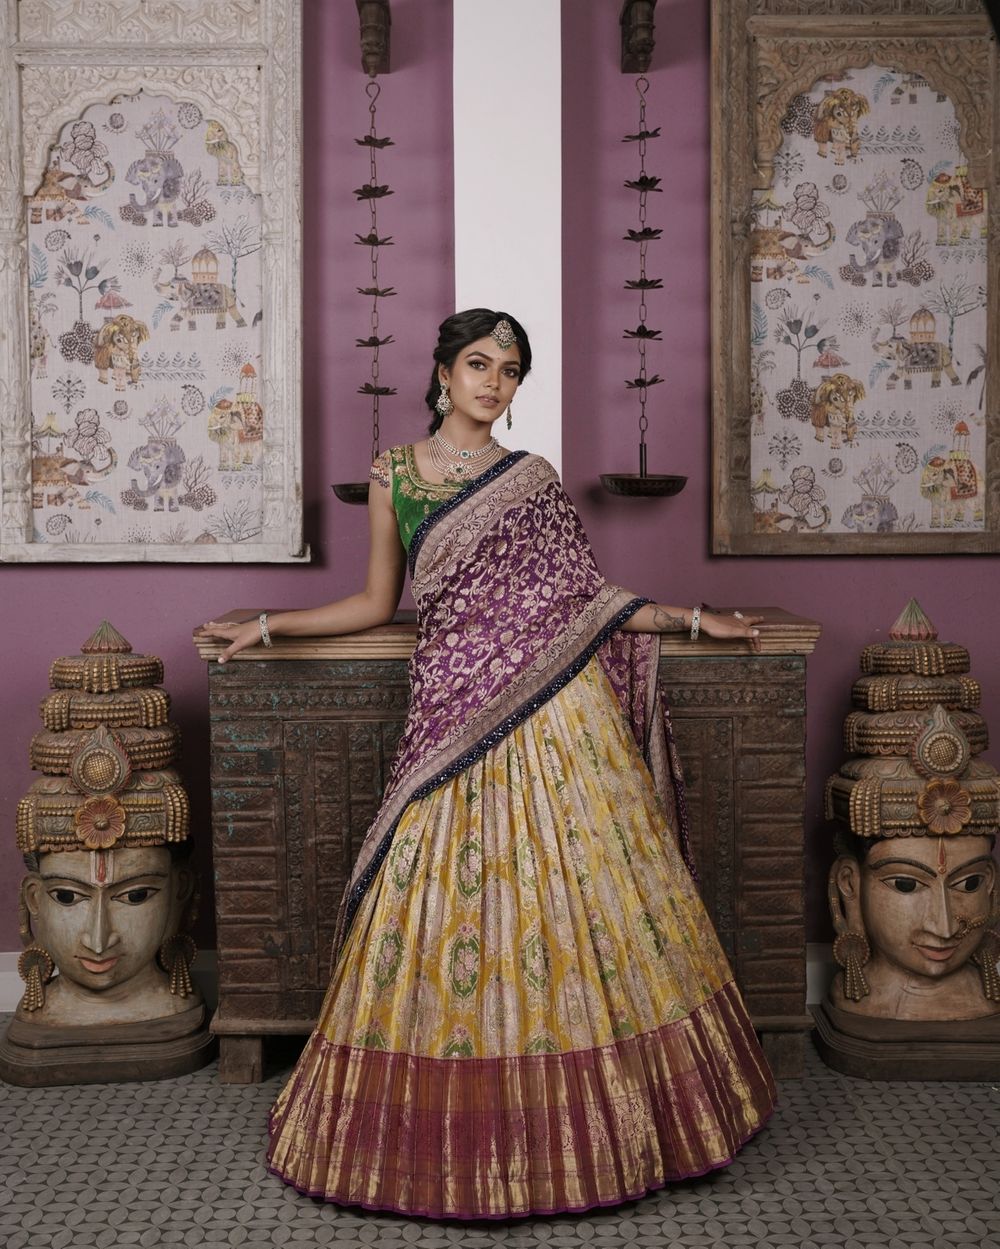 Photo By Angalakruthi Boutique - Bridal Wear